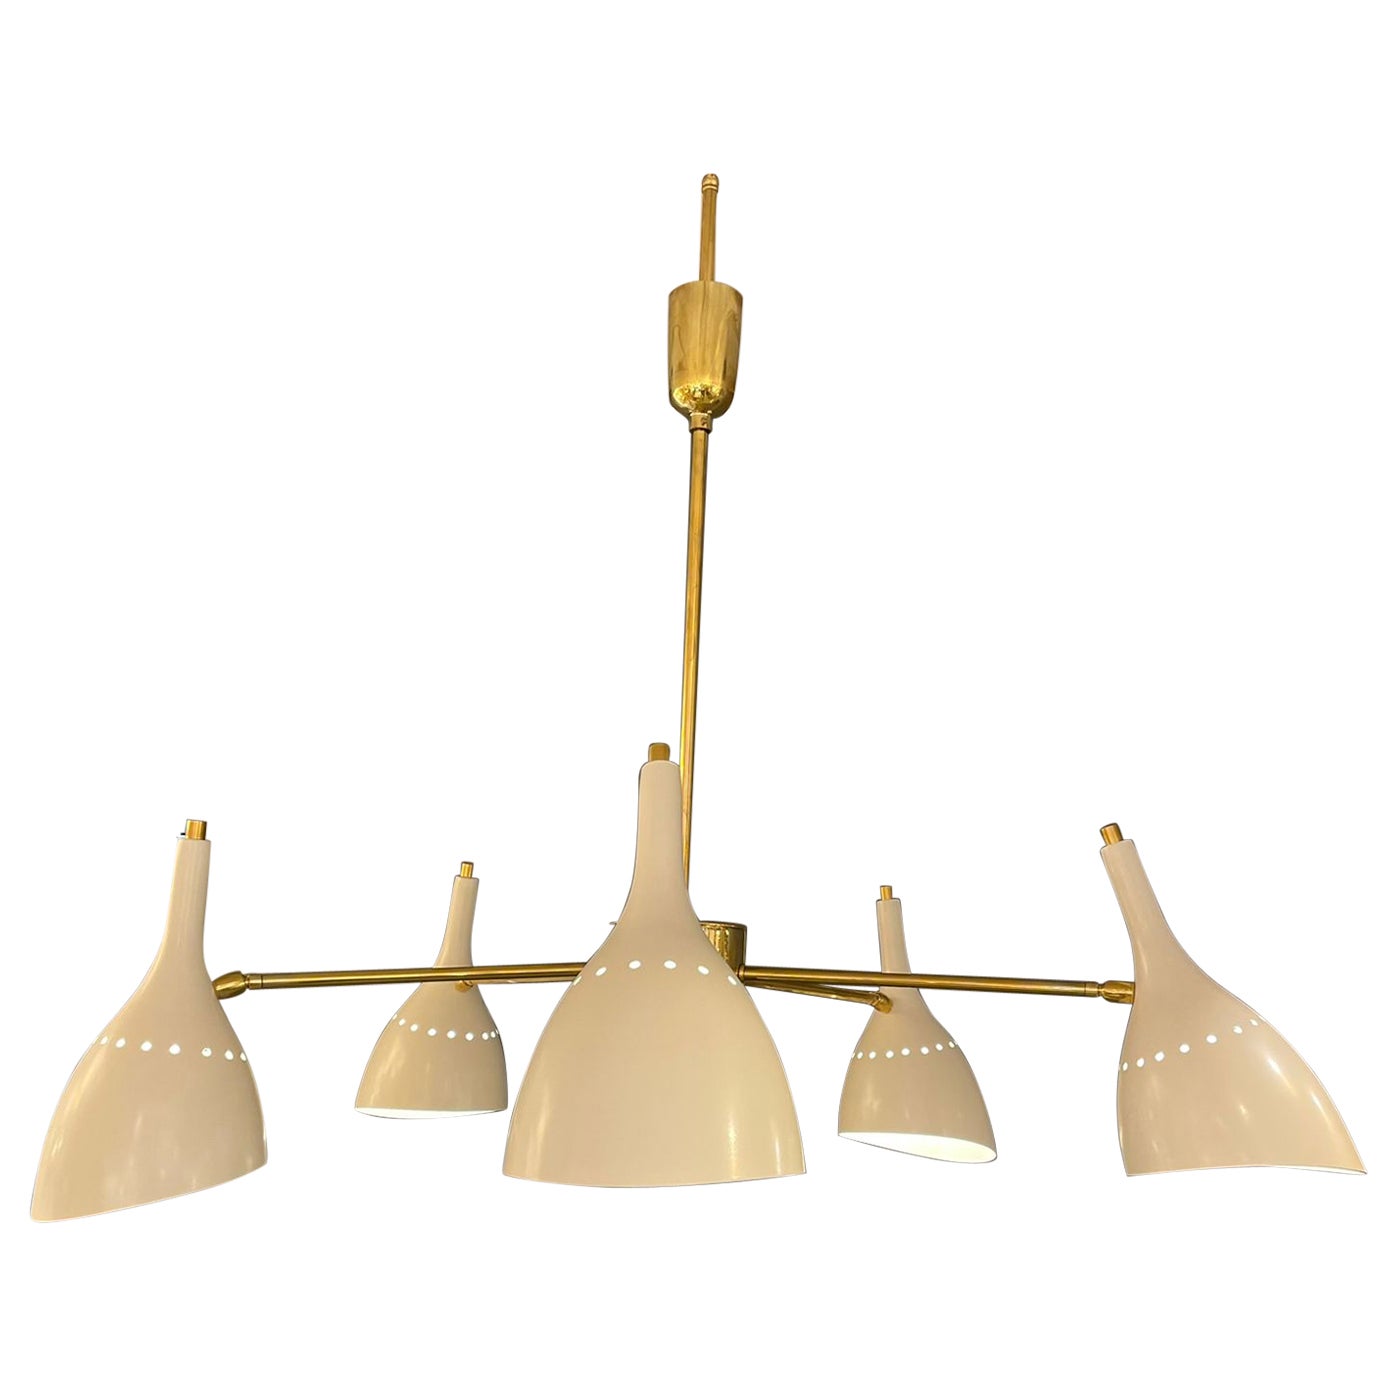 Italian Chandelier in Brass with 5 Arms and Ivory Shades, circa 1970 For Sale